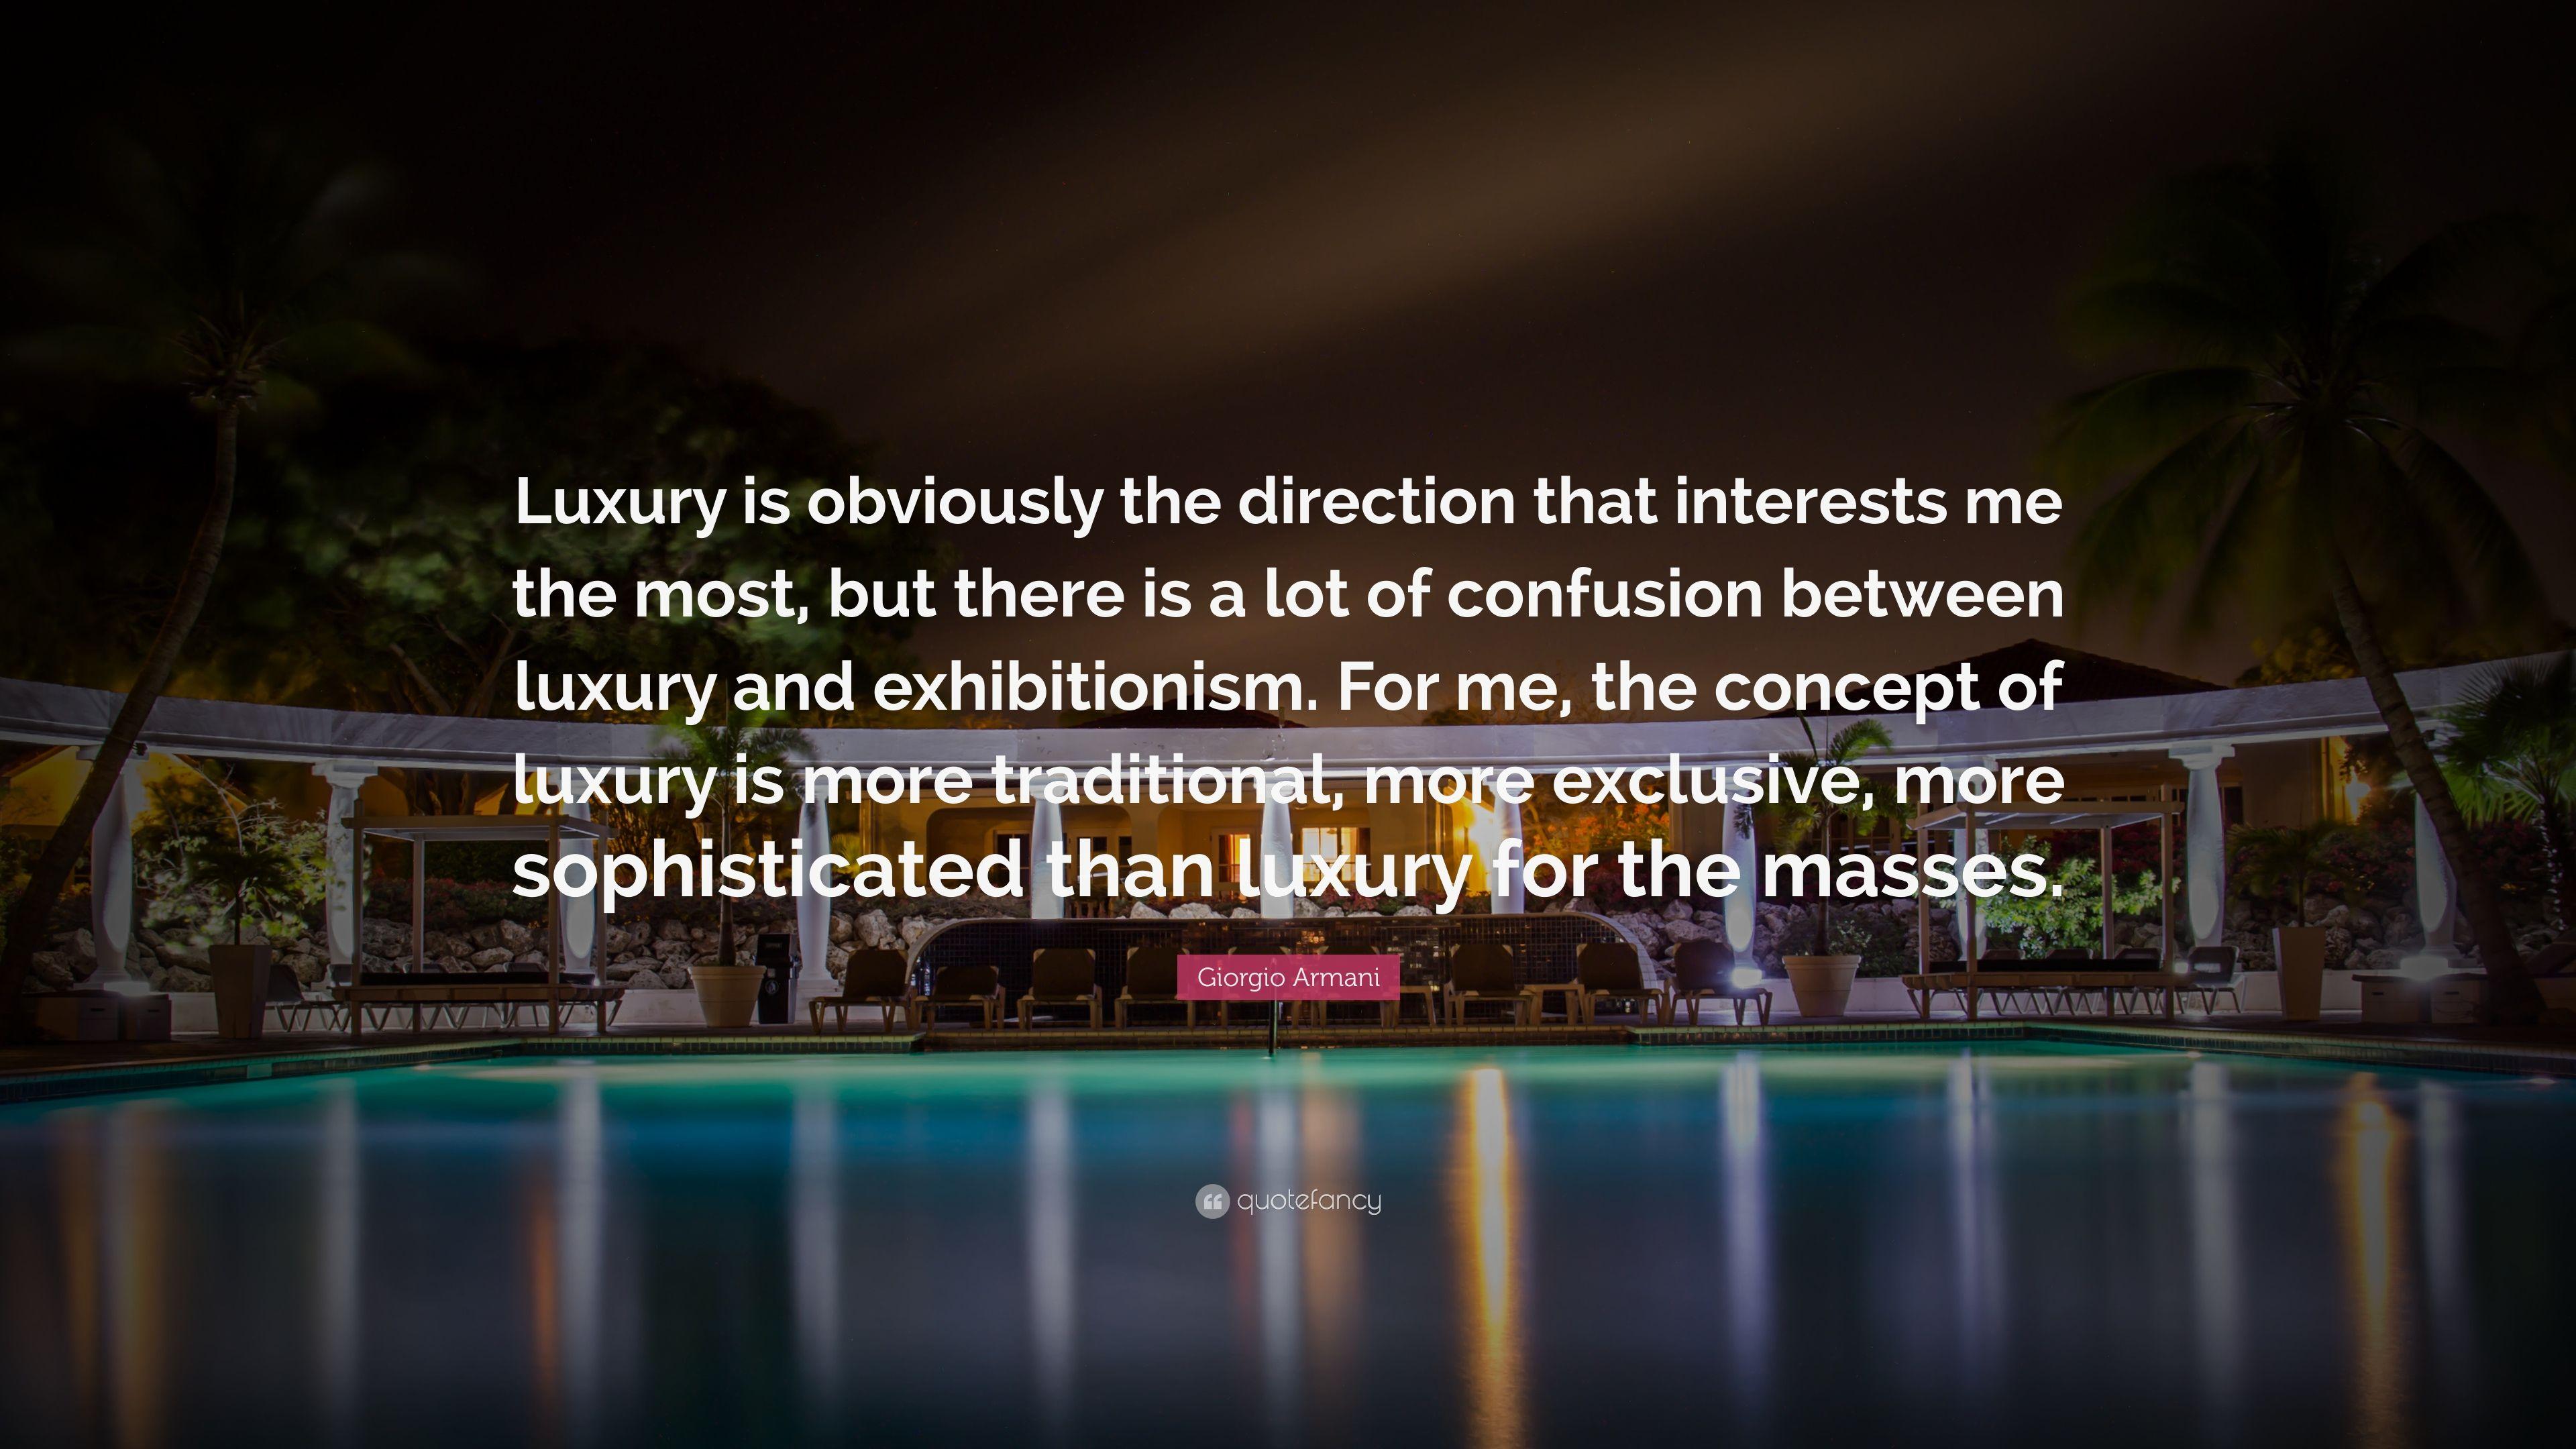 Giorgio Armani Quote: “Luxury is obviously the direction that